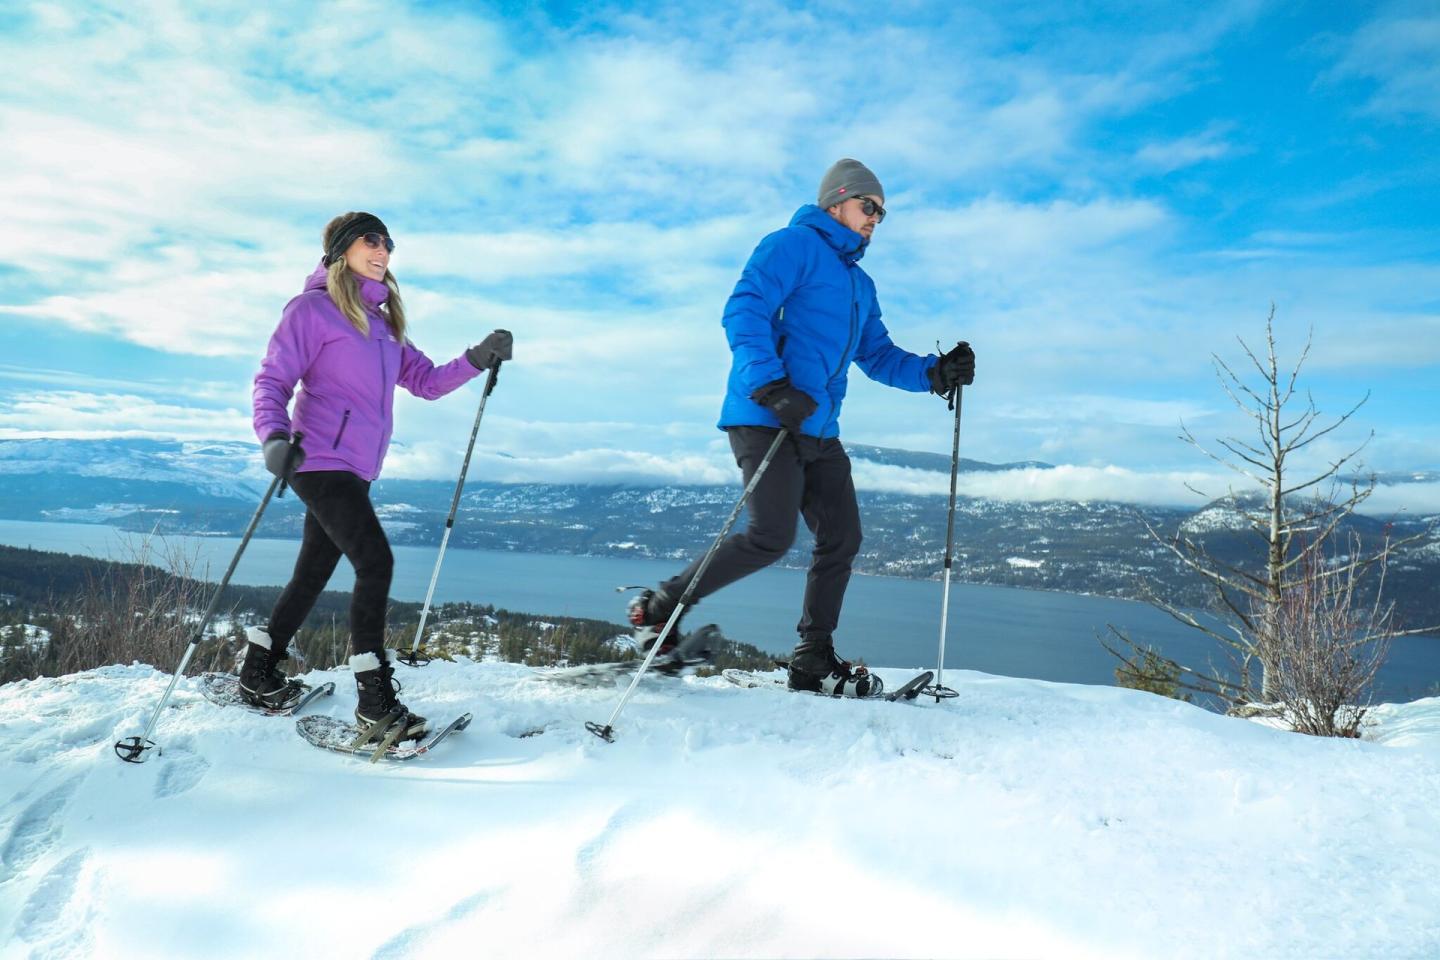 two people snowshoeing